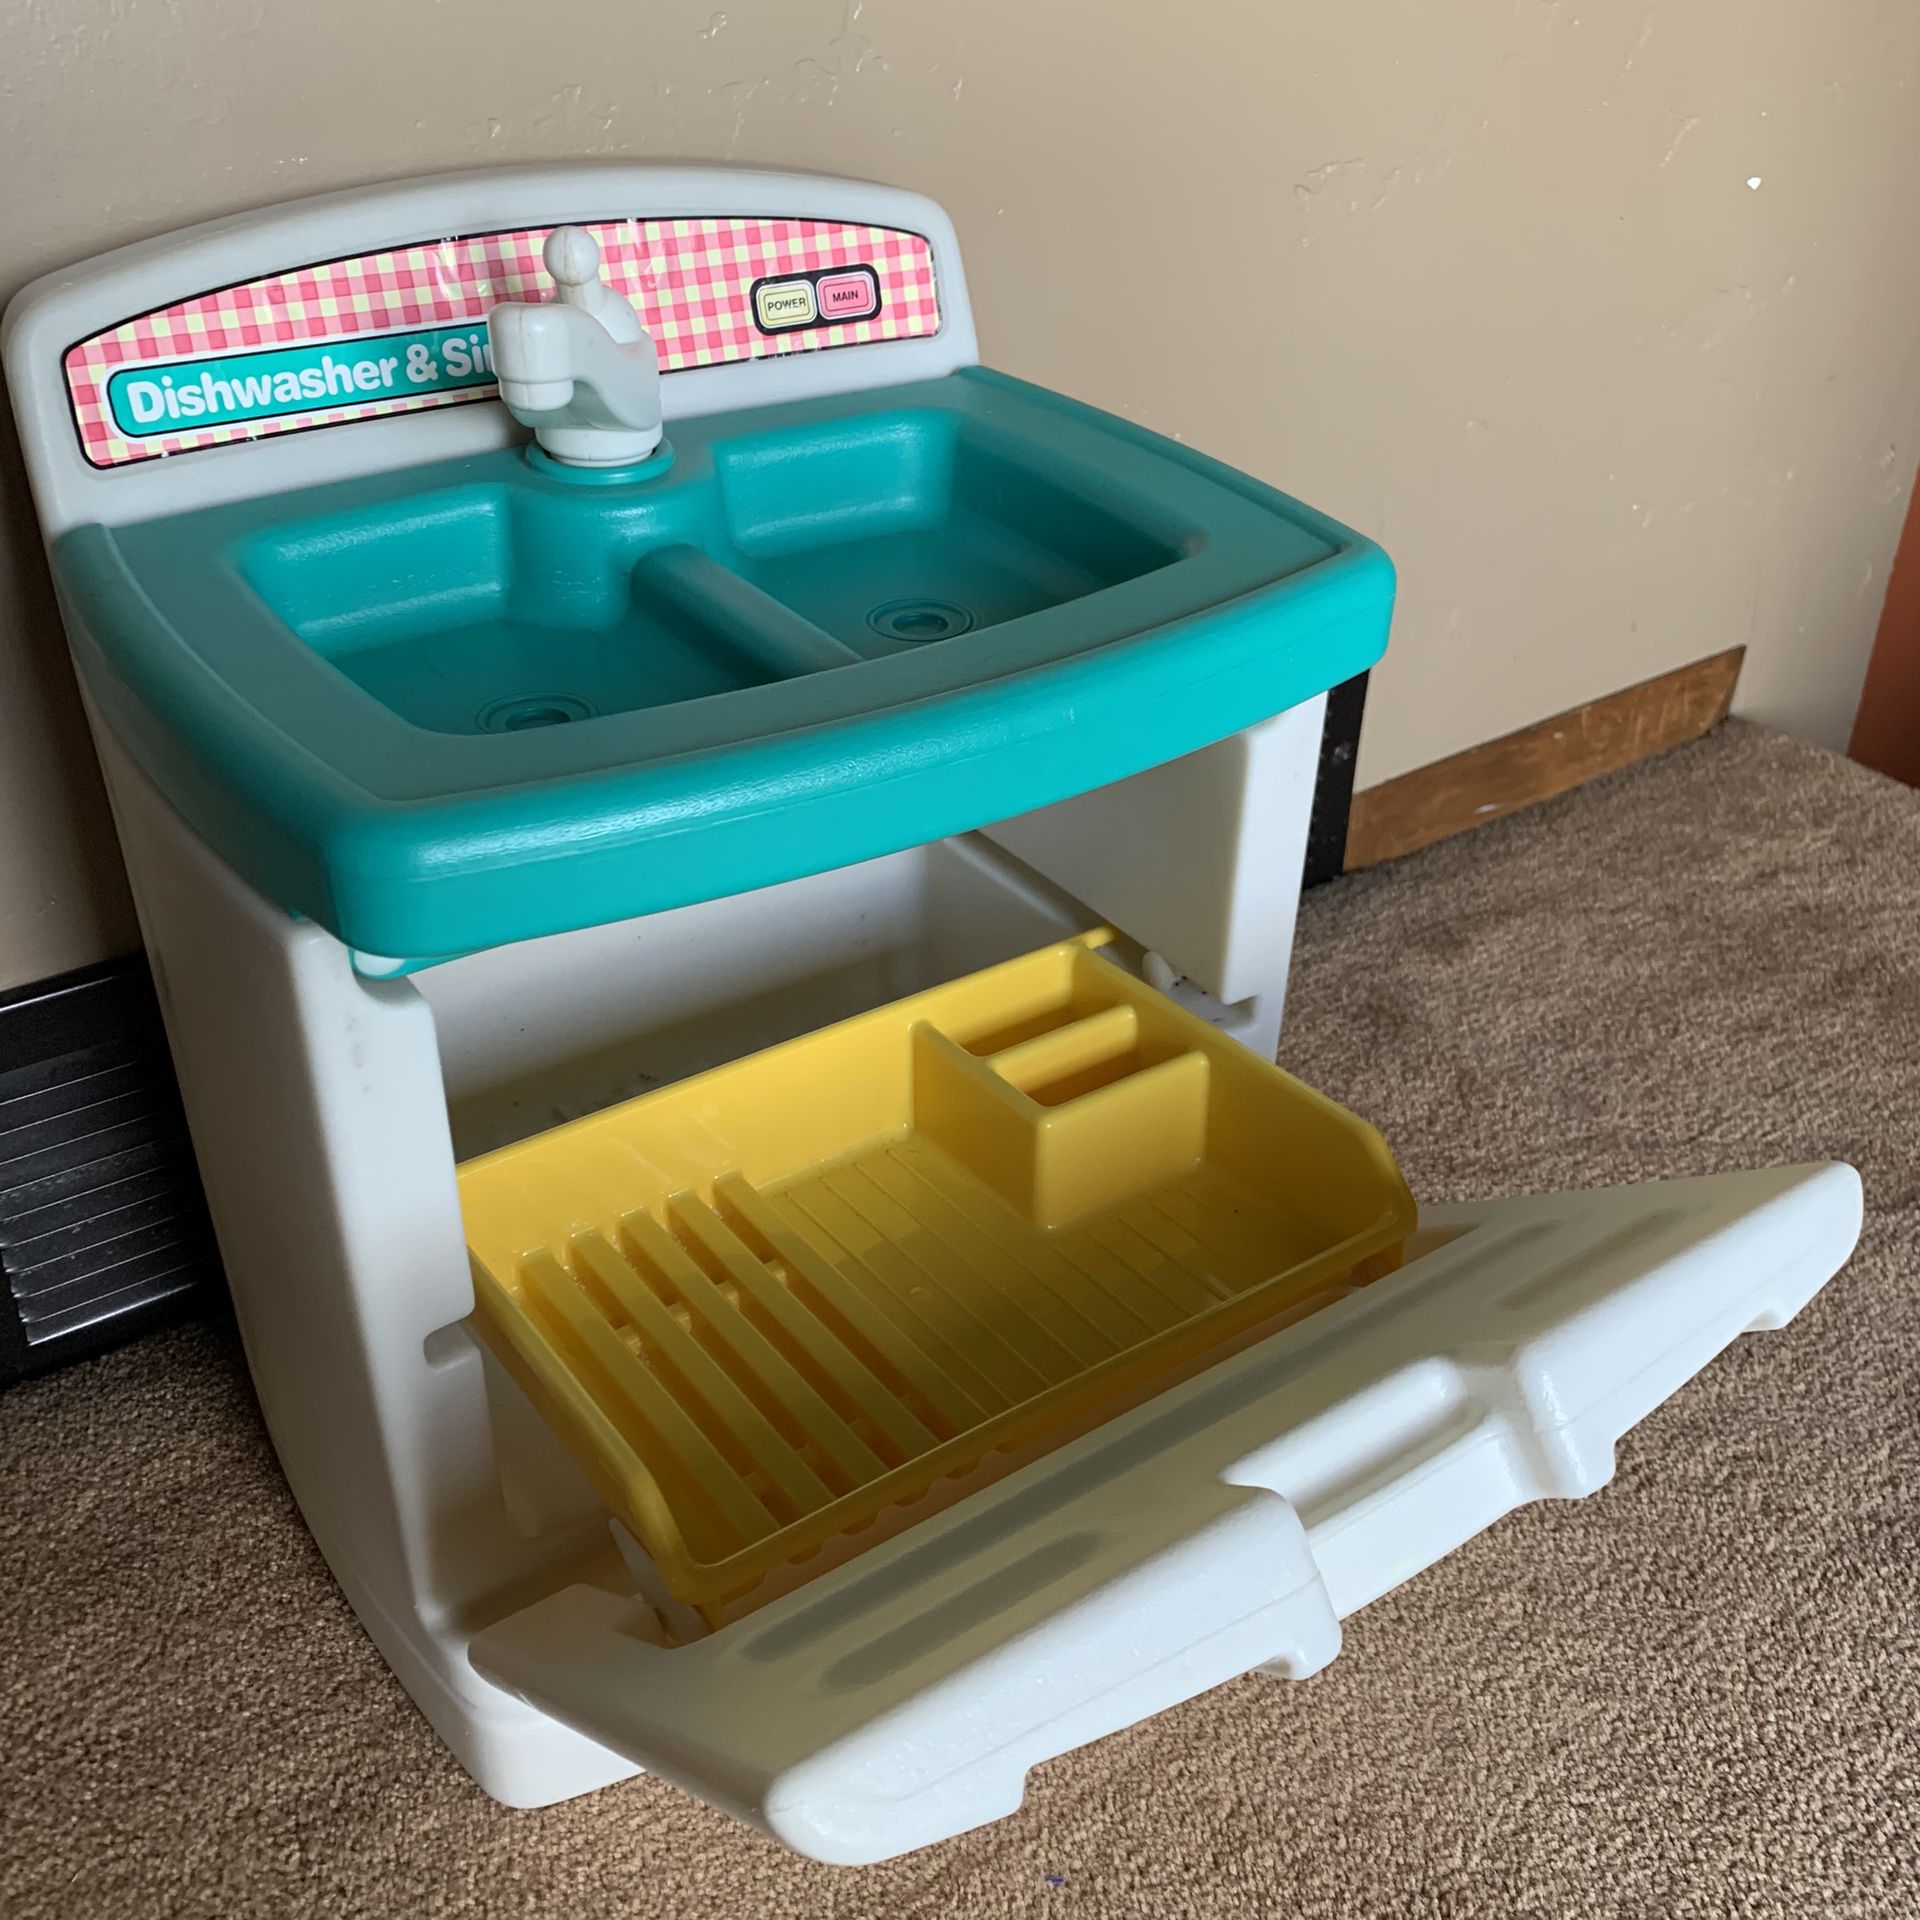 Vintage Step 2 Dishwasher & Sink Kids Toy Life Size Imaginative Play Preschool Daycare 90s WELL MADE